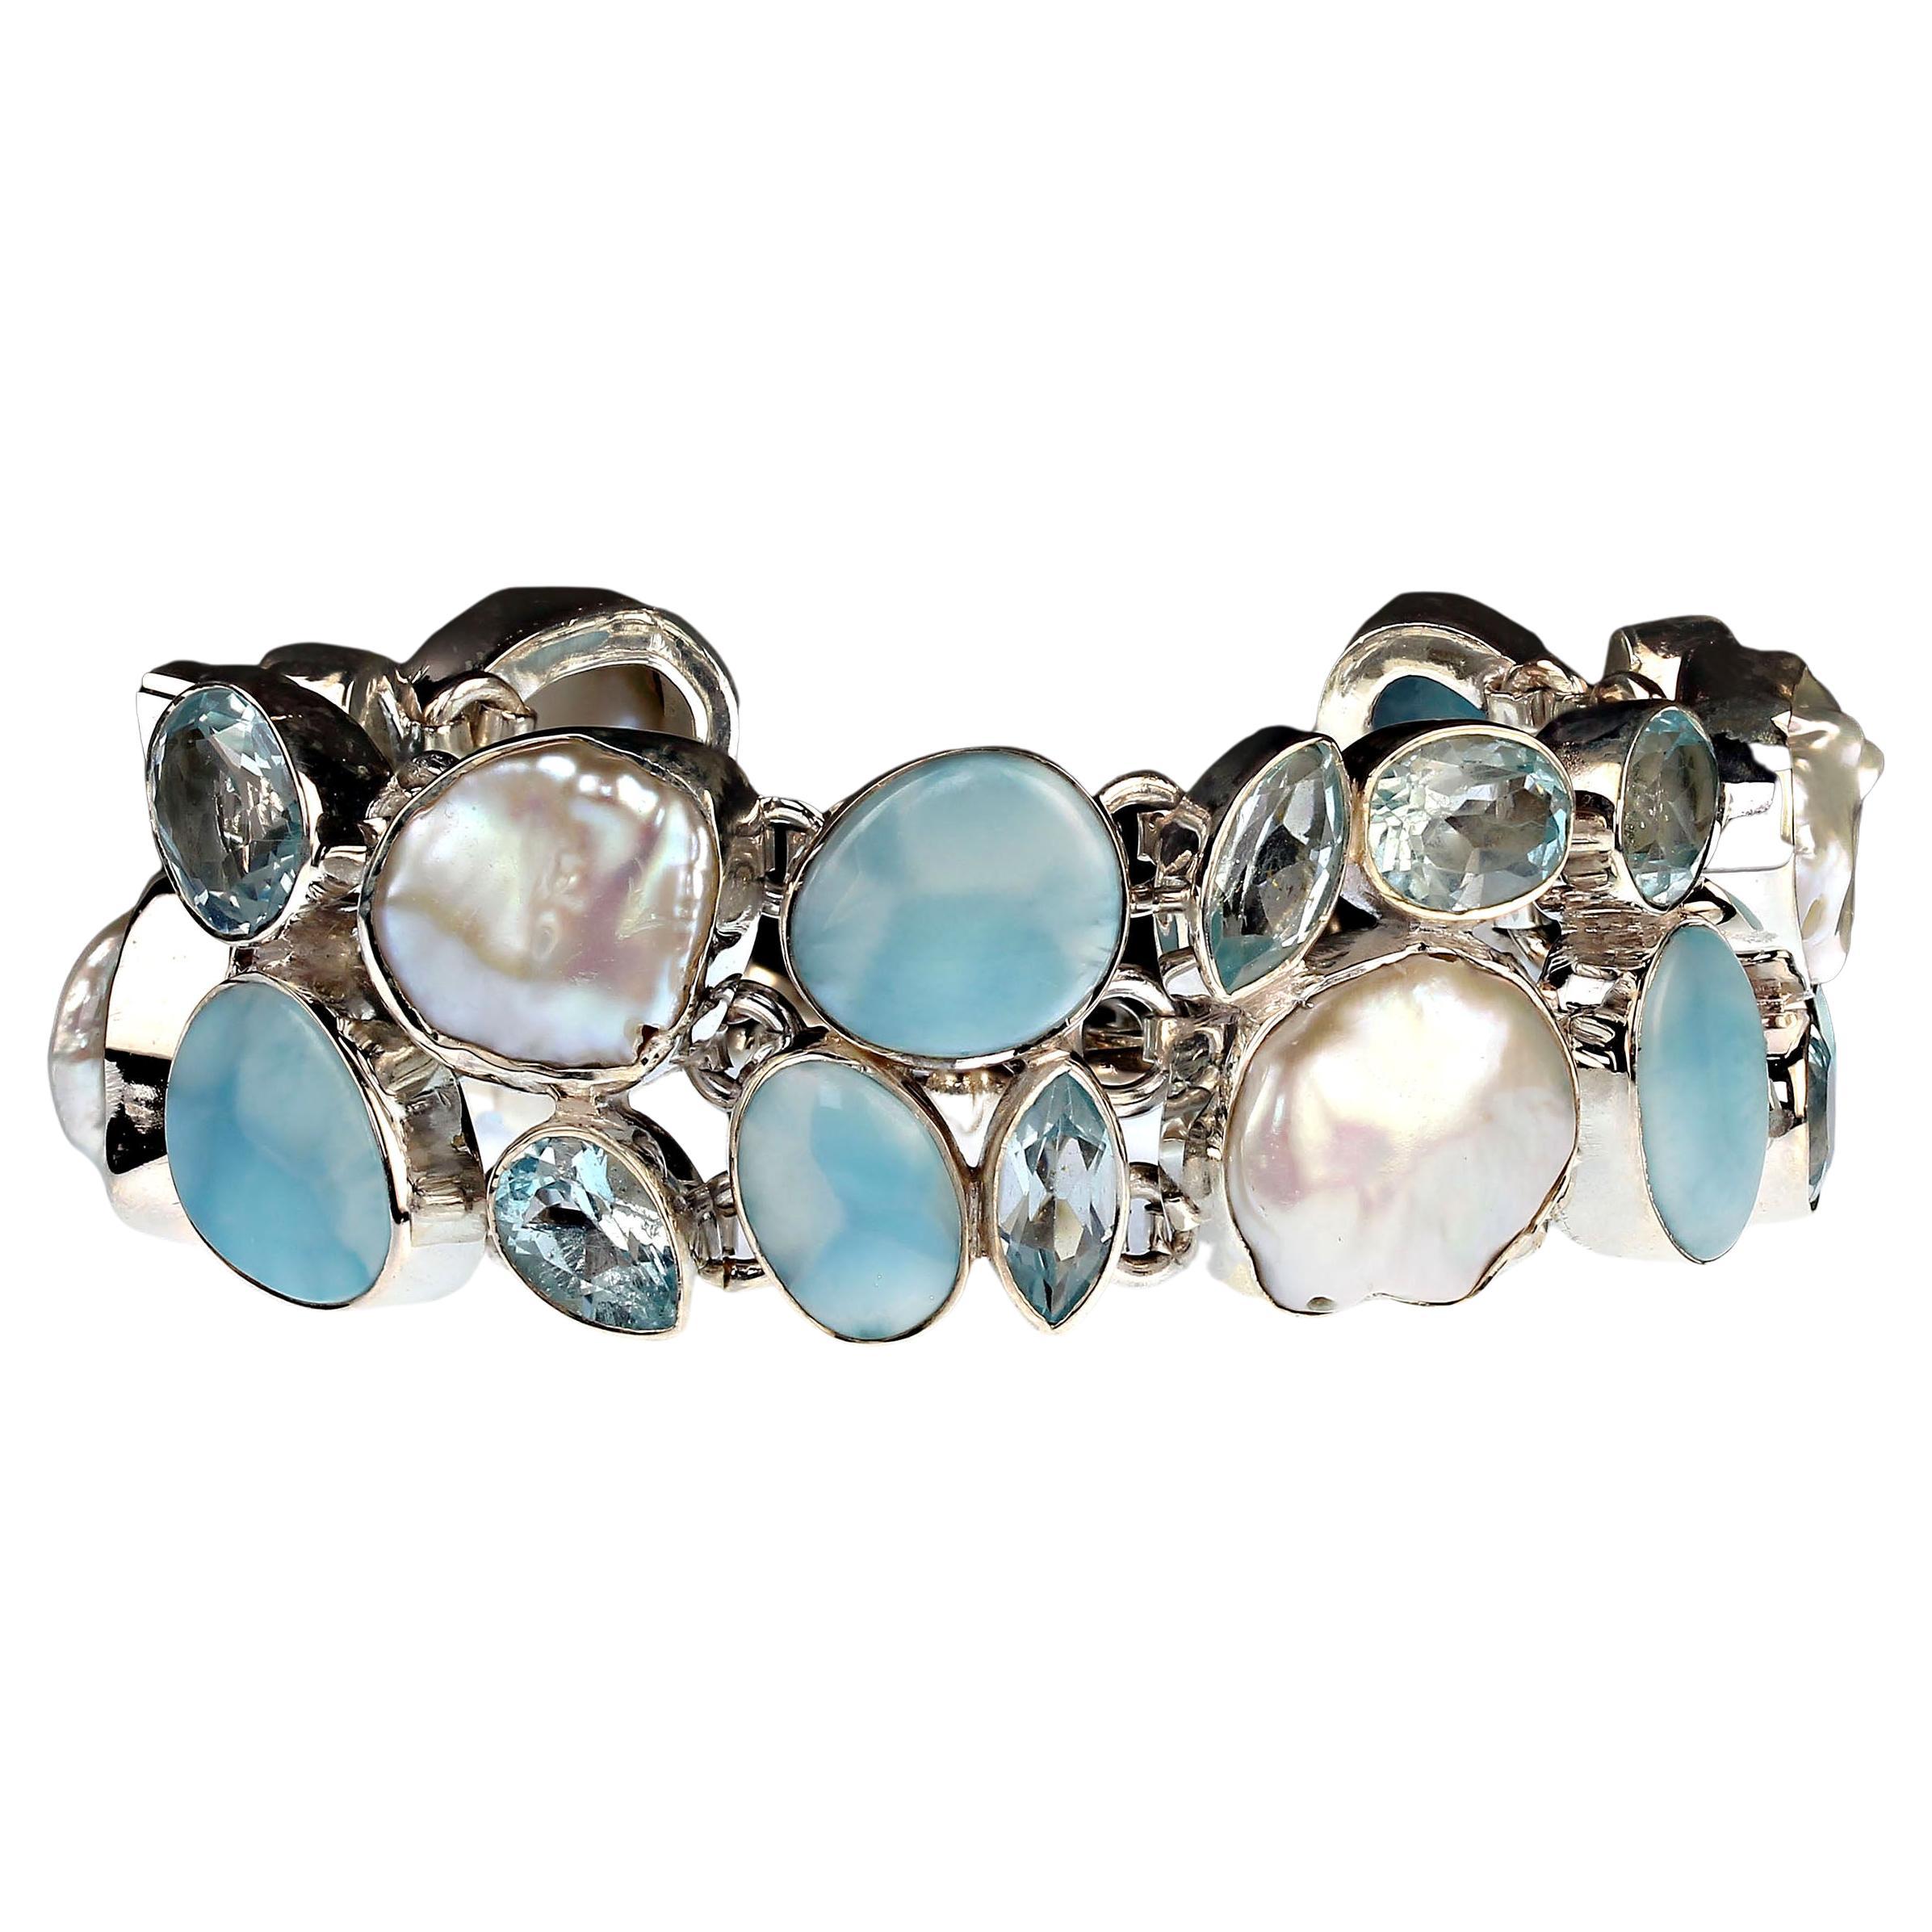 Magnificent bracelet of biwa pearl, blue topaz, and larimar.  Wear this gorgeous bracelet and feel like a million bucks!  It is so gorgeous.  The gemstone span just over 5 inches and are 7/8 inches in width.  The entire bracelet with entendable